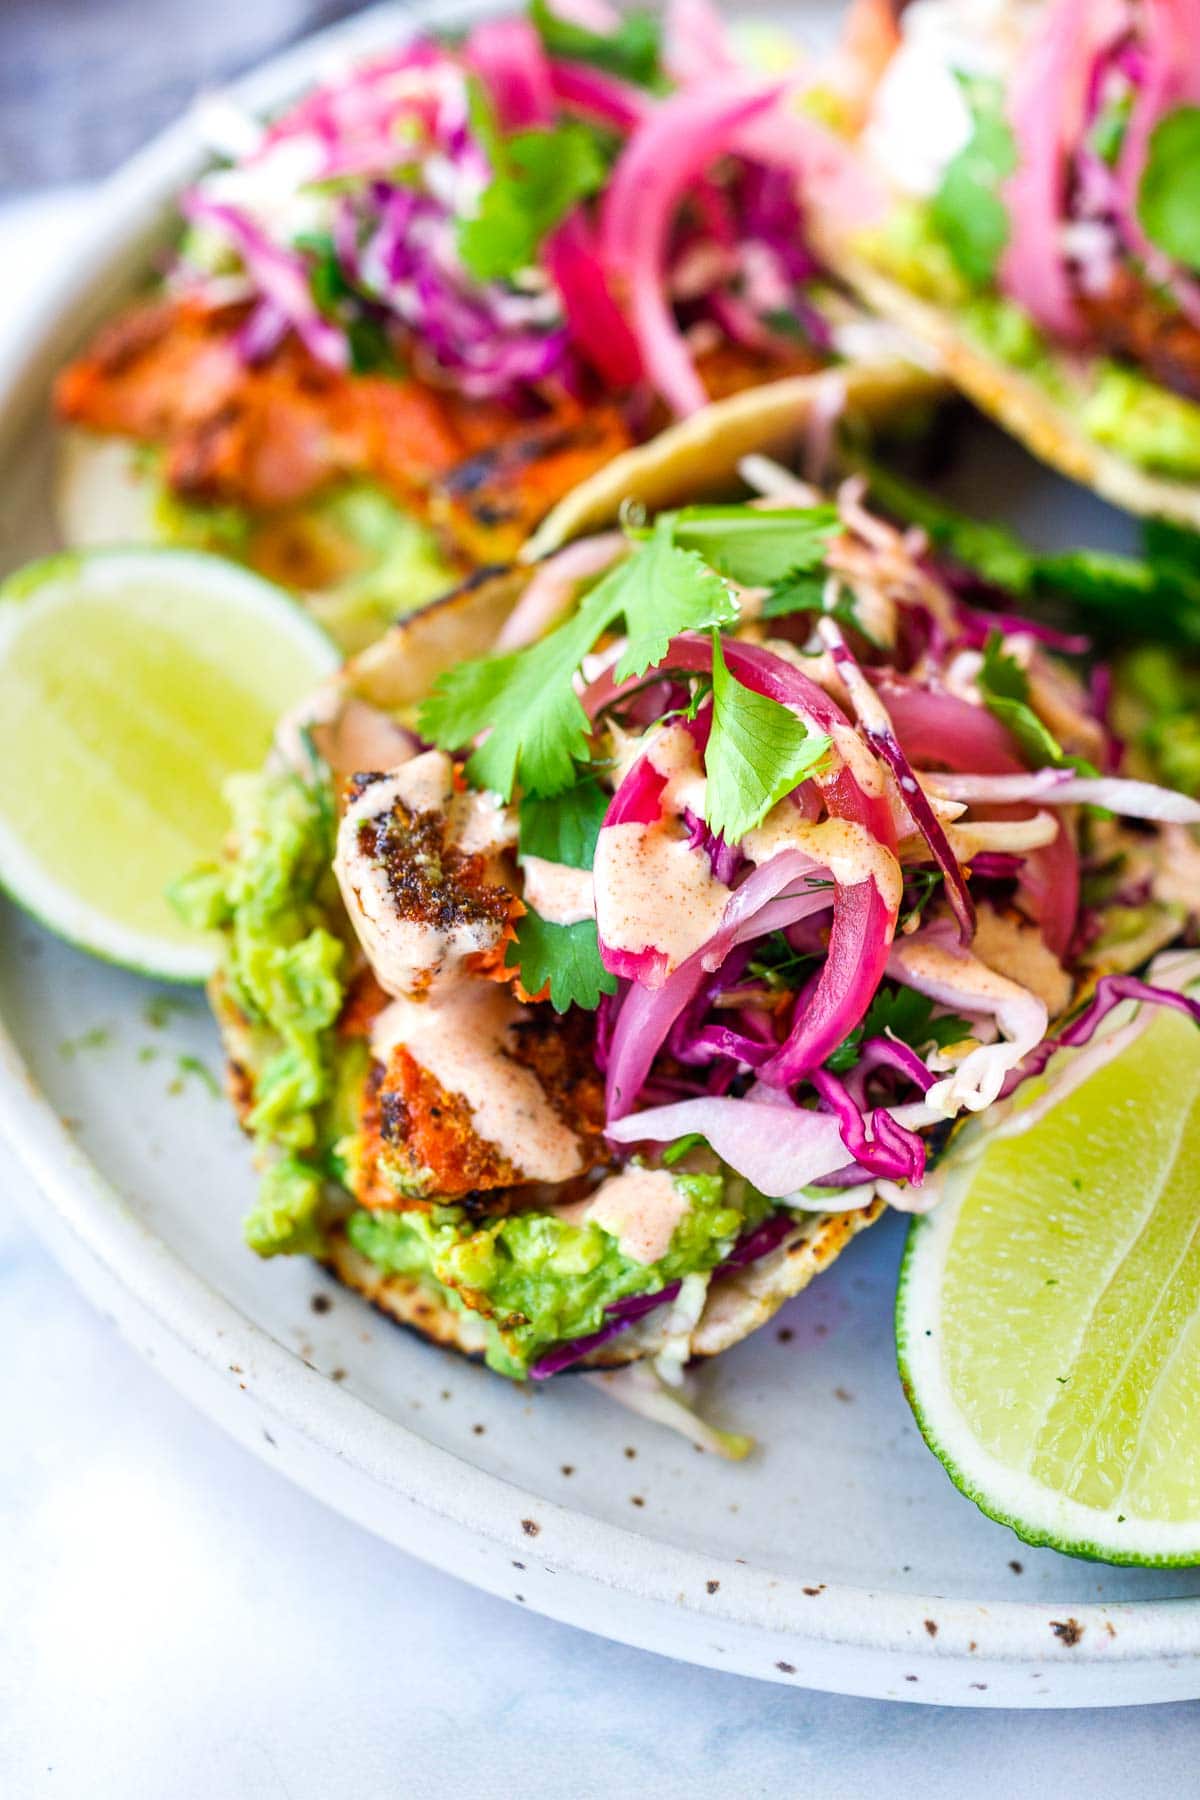 These Salmon Tacos are healthy and delicious and fun to make! The salmon is coated in cajun spice and quickly blackened in a skillet, then paired with a flavorful cabbage-fennel slaw, pickled onions and mashed avocado.